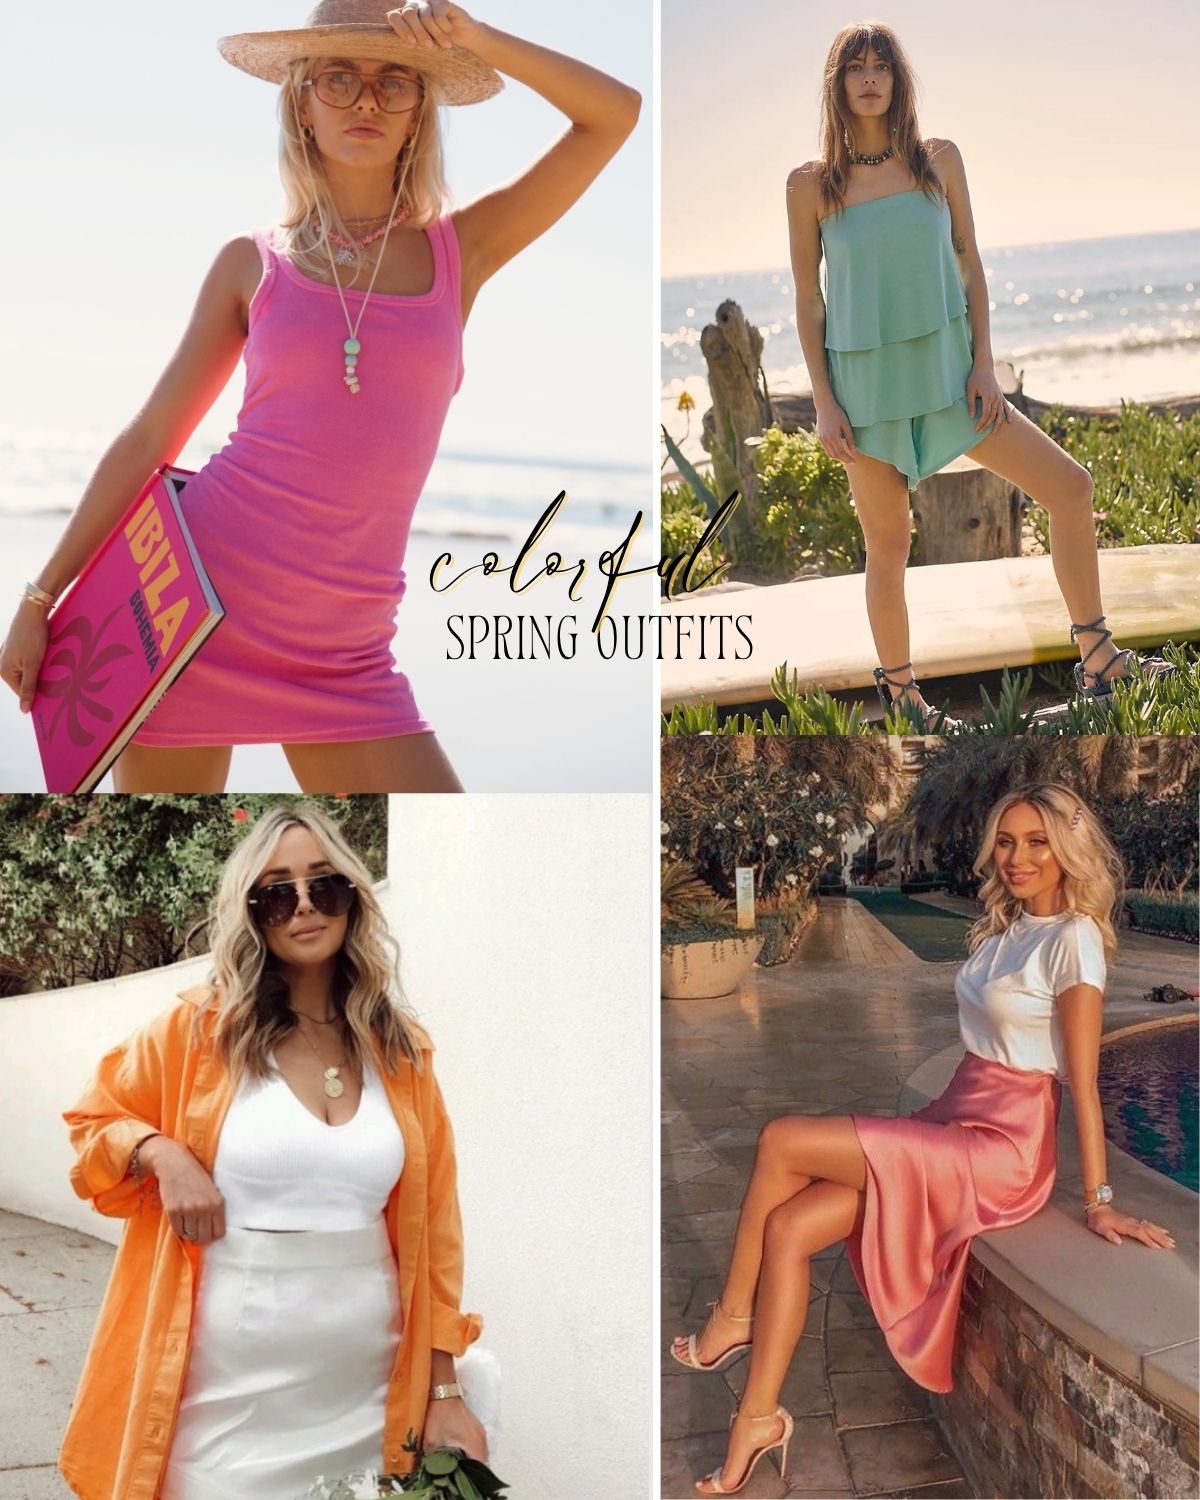 Four colorful spring outfits